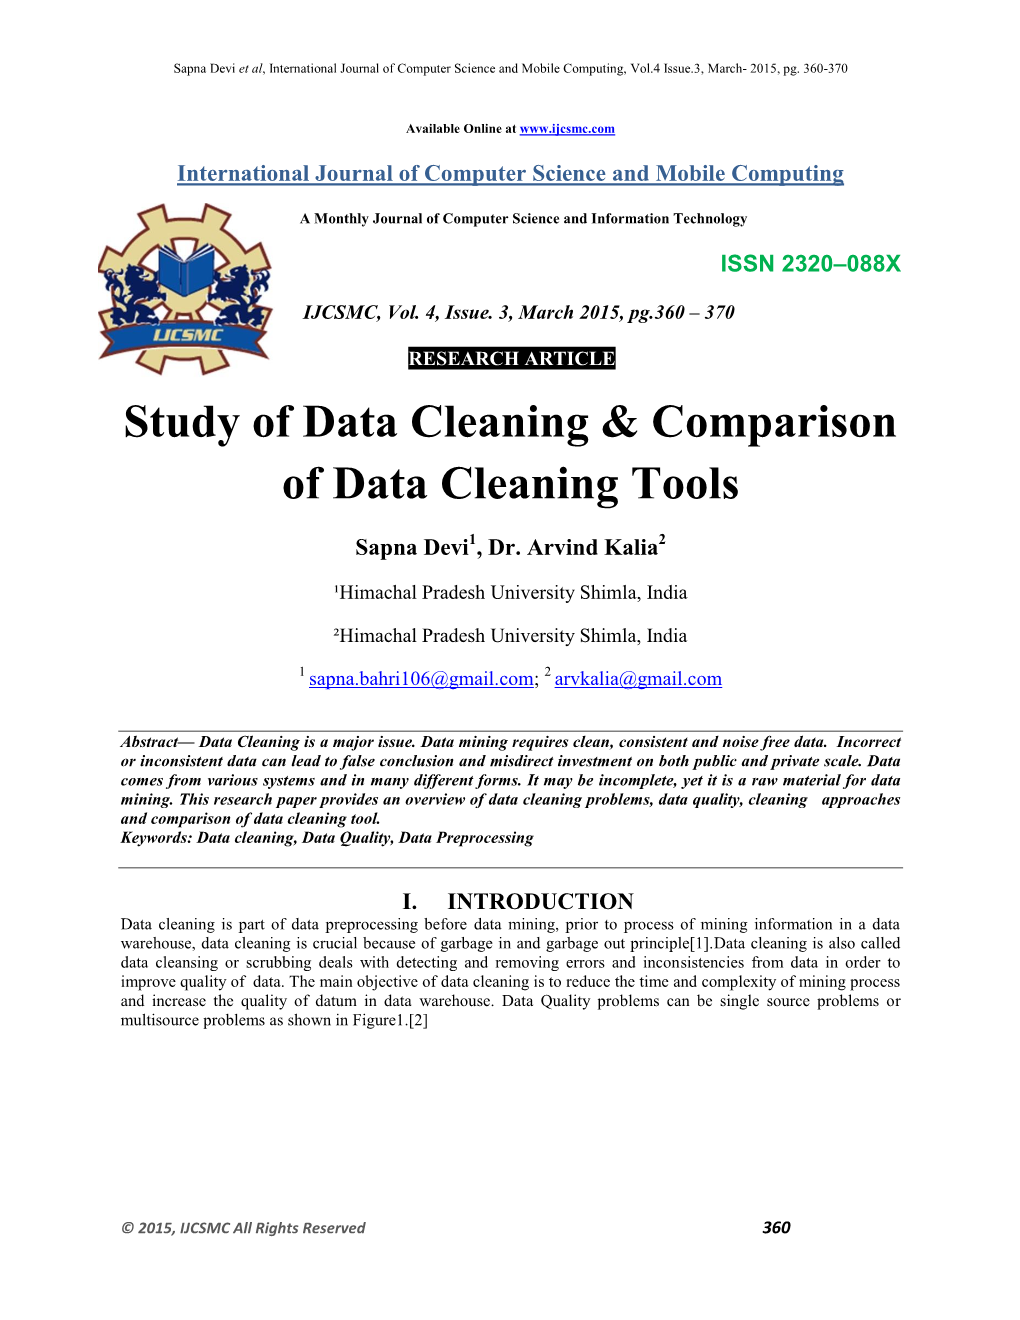 Study of Data Cleaning & Comparison of Data Cleaning Tools